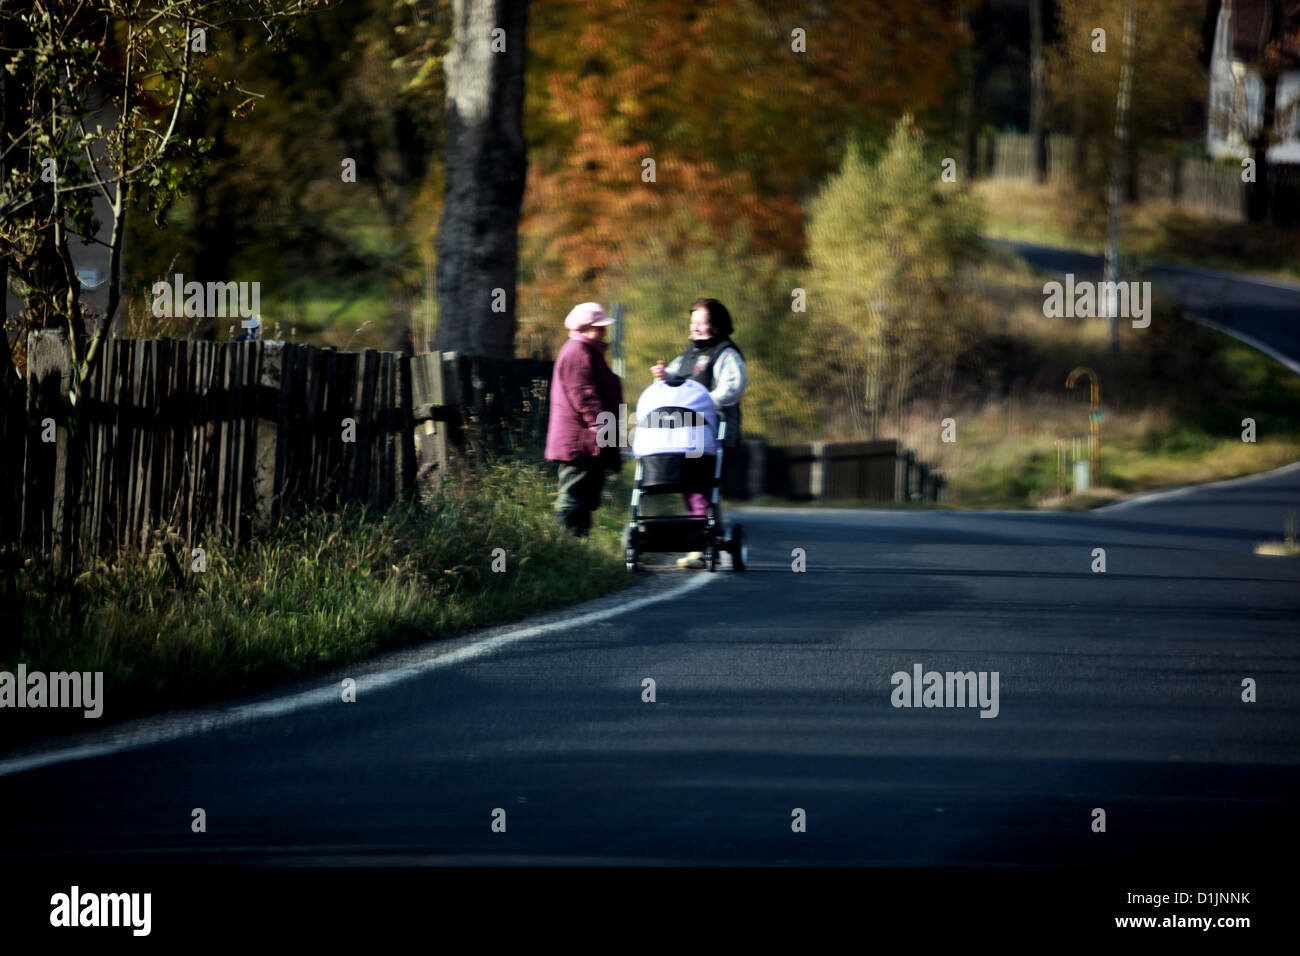 Two women with a pram to walk along the road, roadside, dangerously, autumn rural scenery Stock Photo